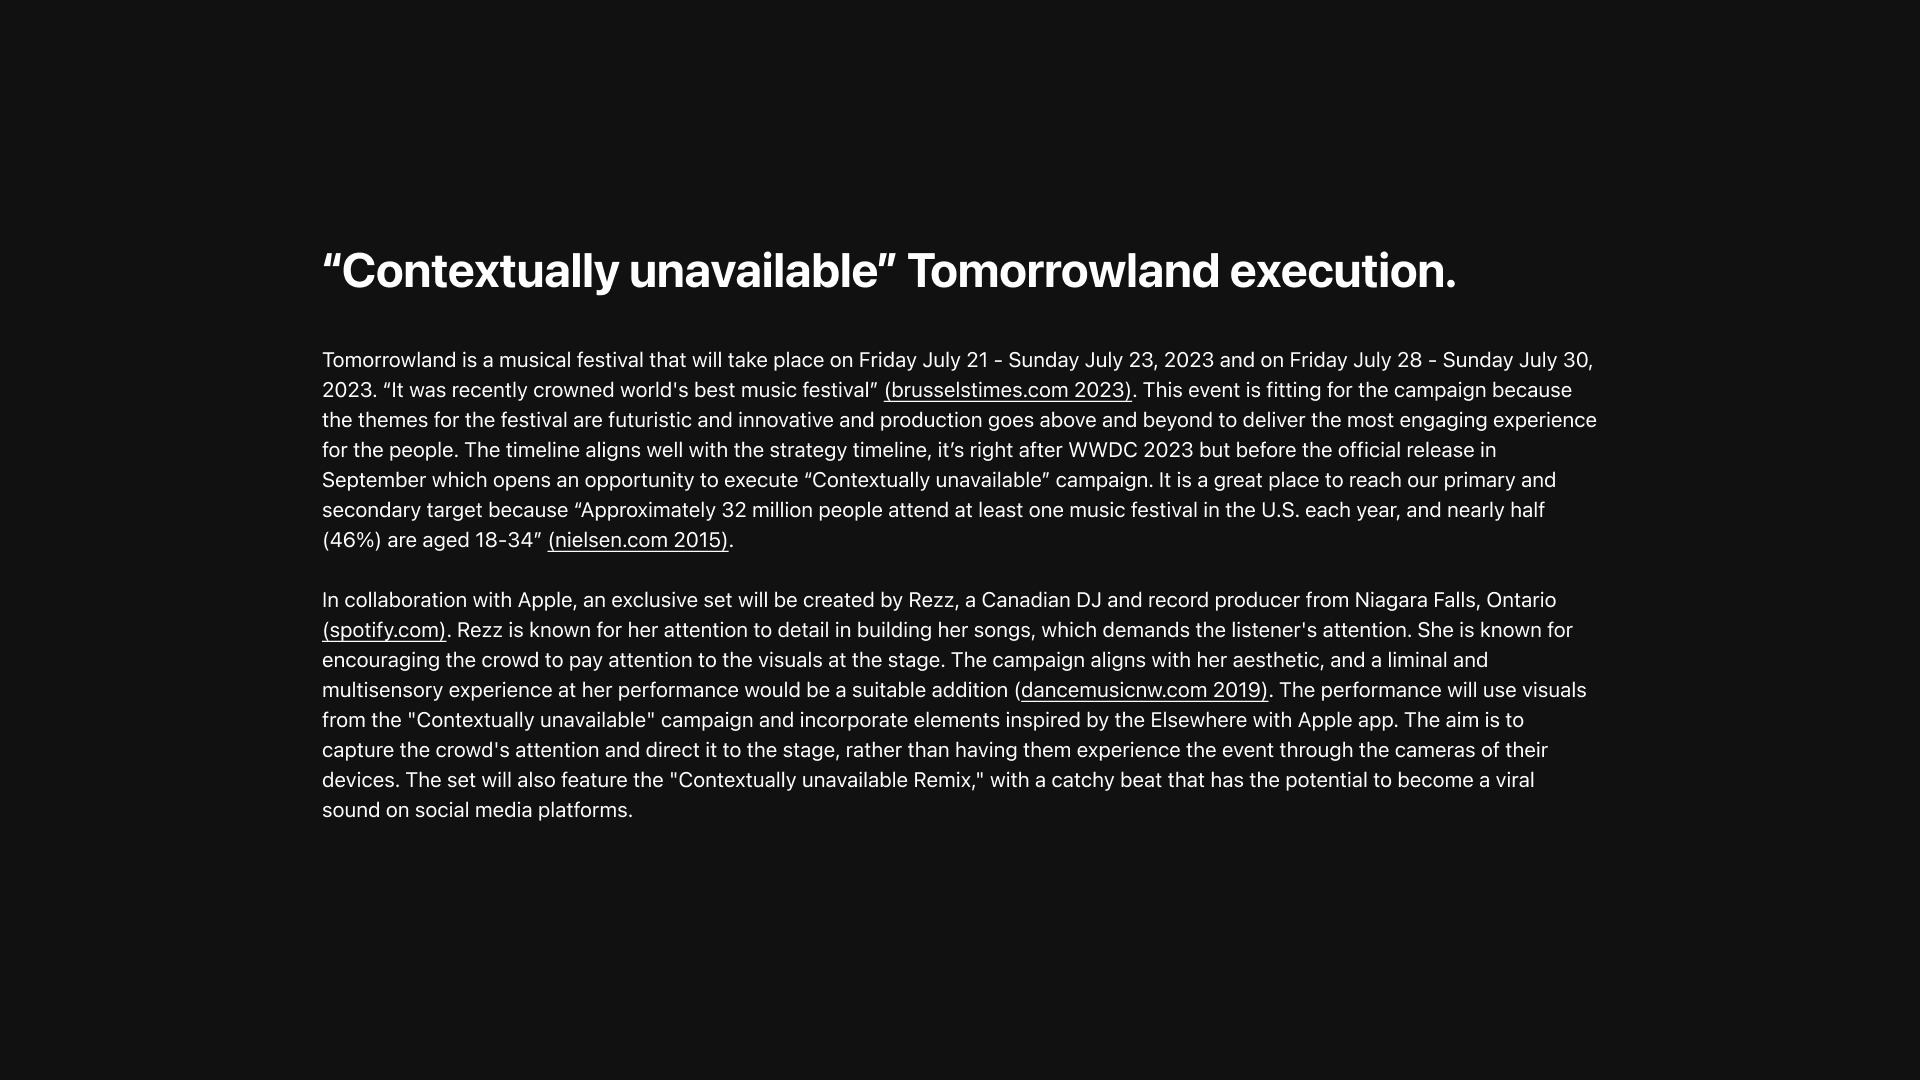 "Contextually unavailable" Tomorrowland execution overview.